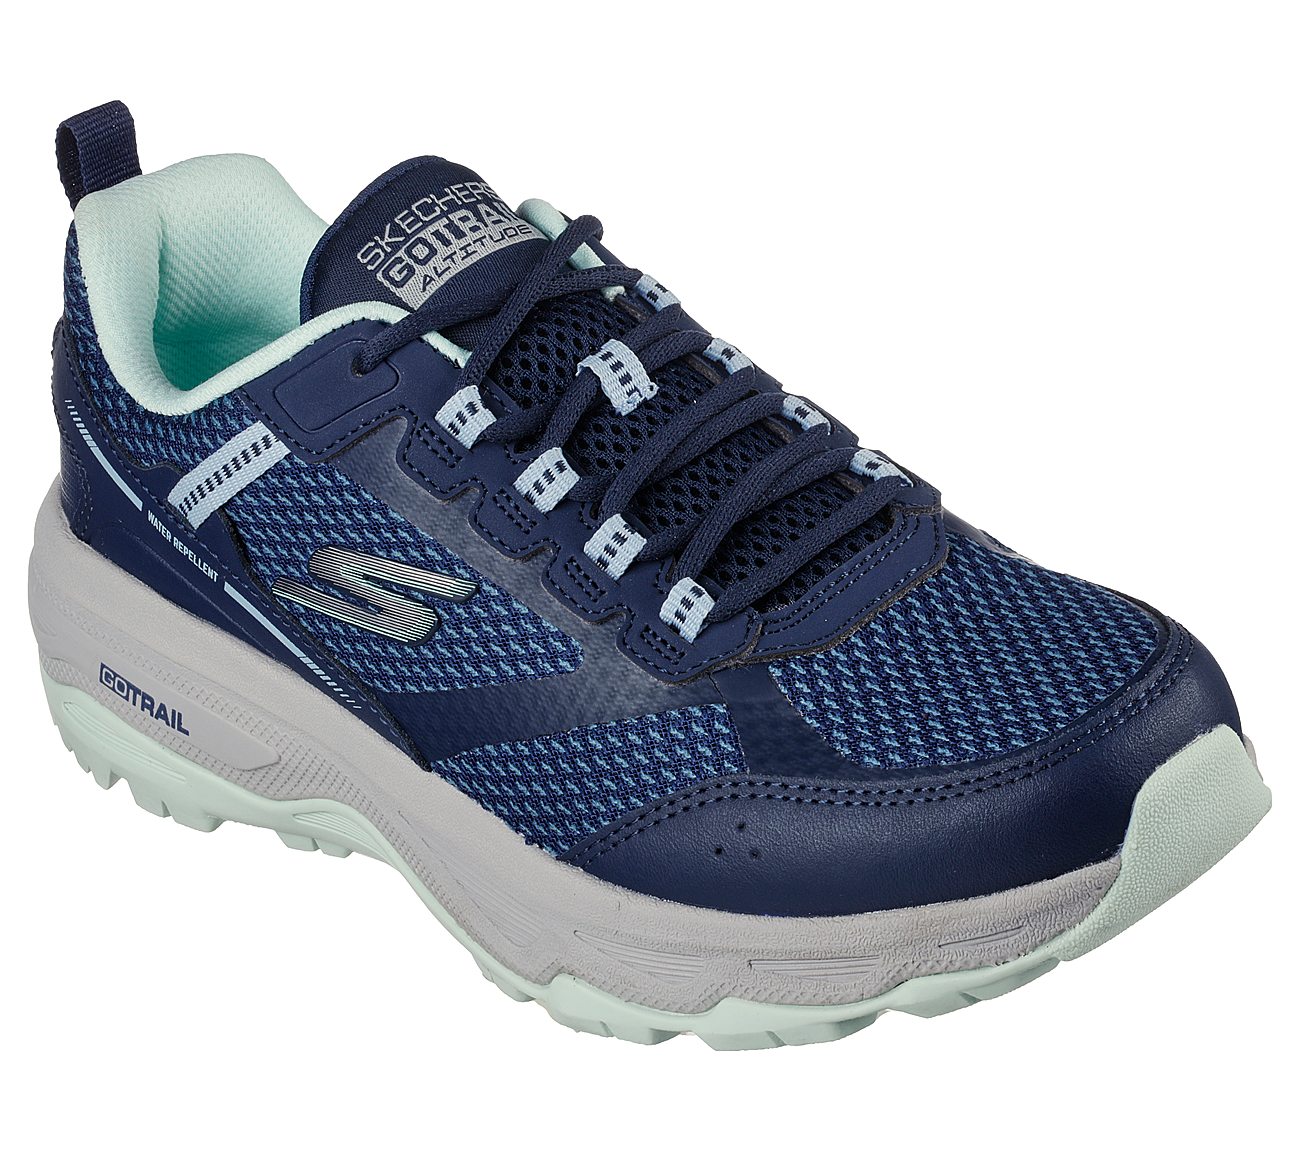 GO RUN TRAIL ALTITUDE, NAVY/TURQUOISE Footwear Lateral View